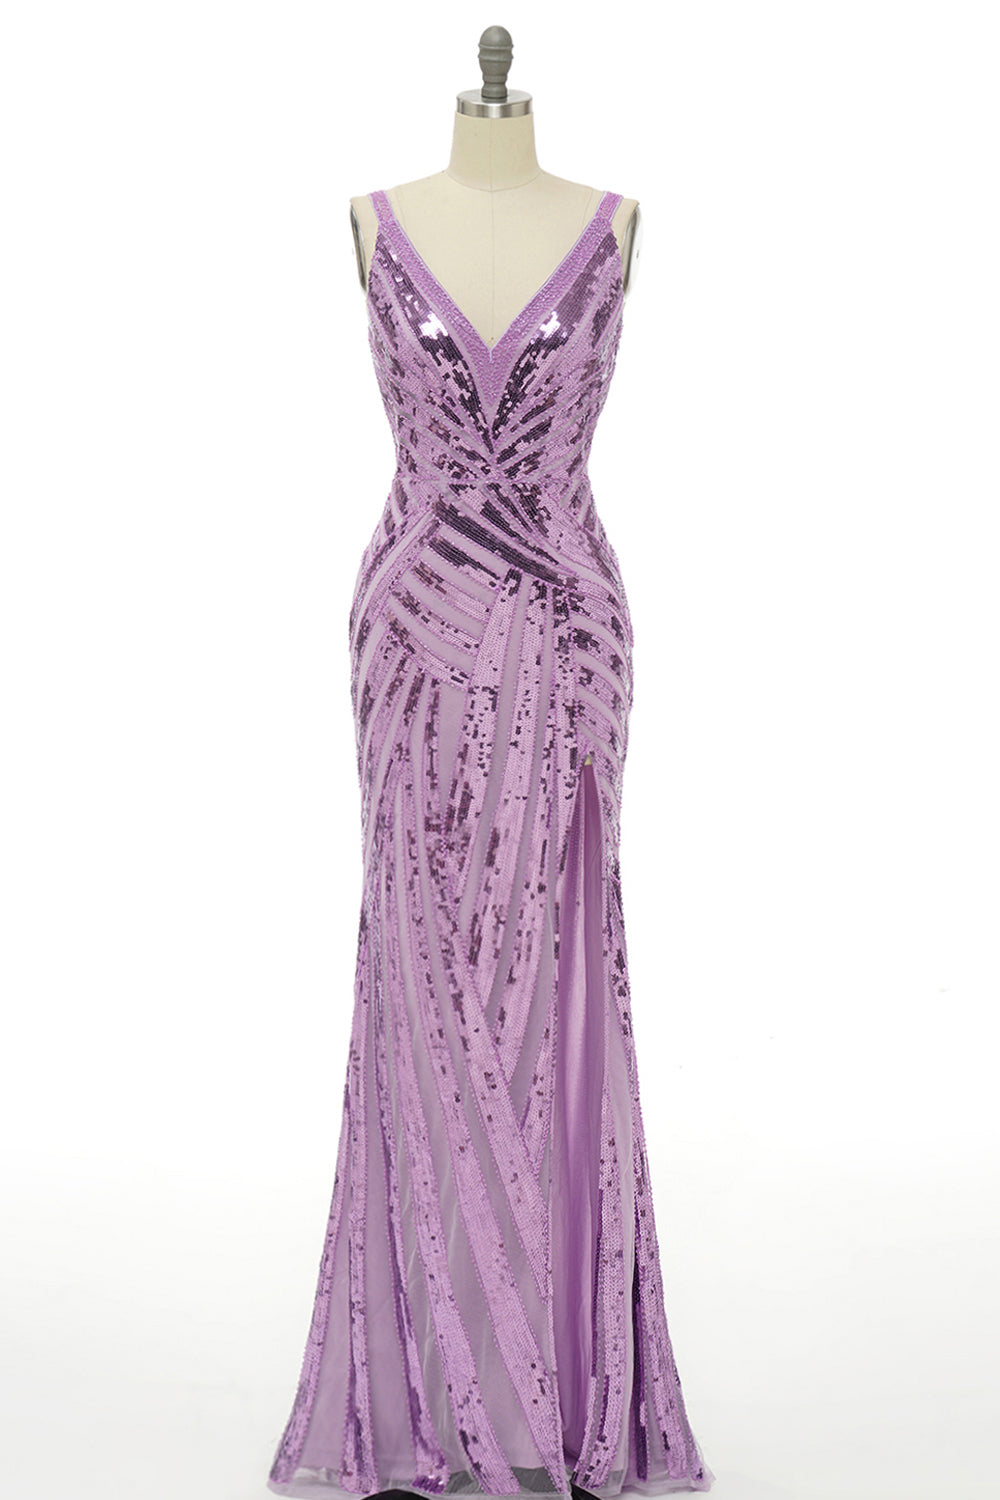 Sparkly Purple Sequins Backless Long Prom Dress